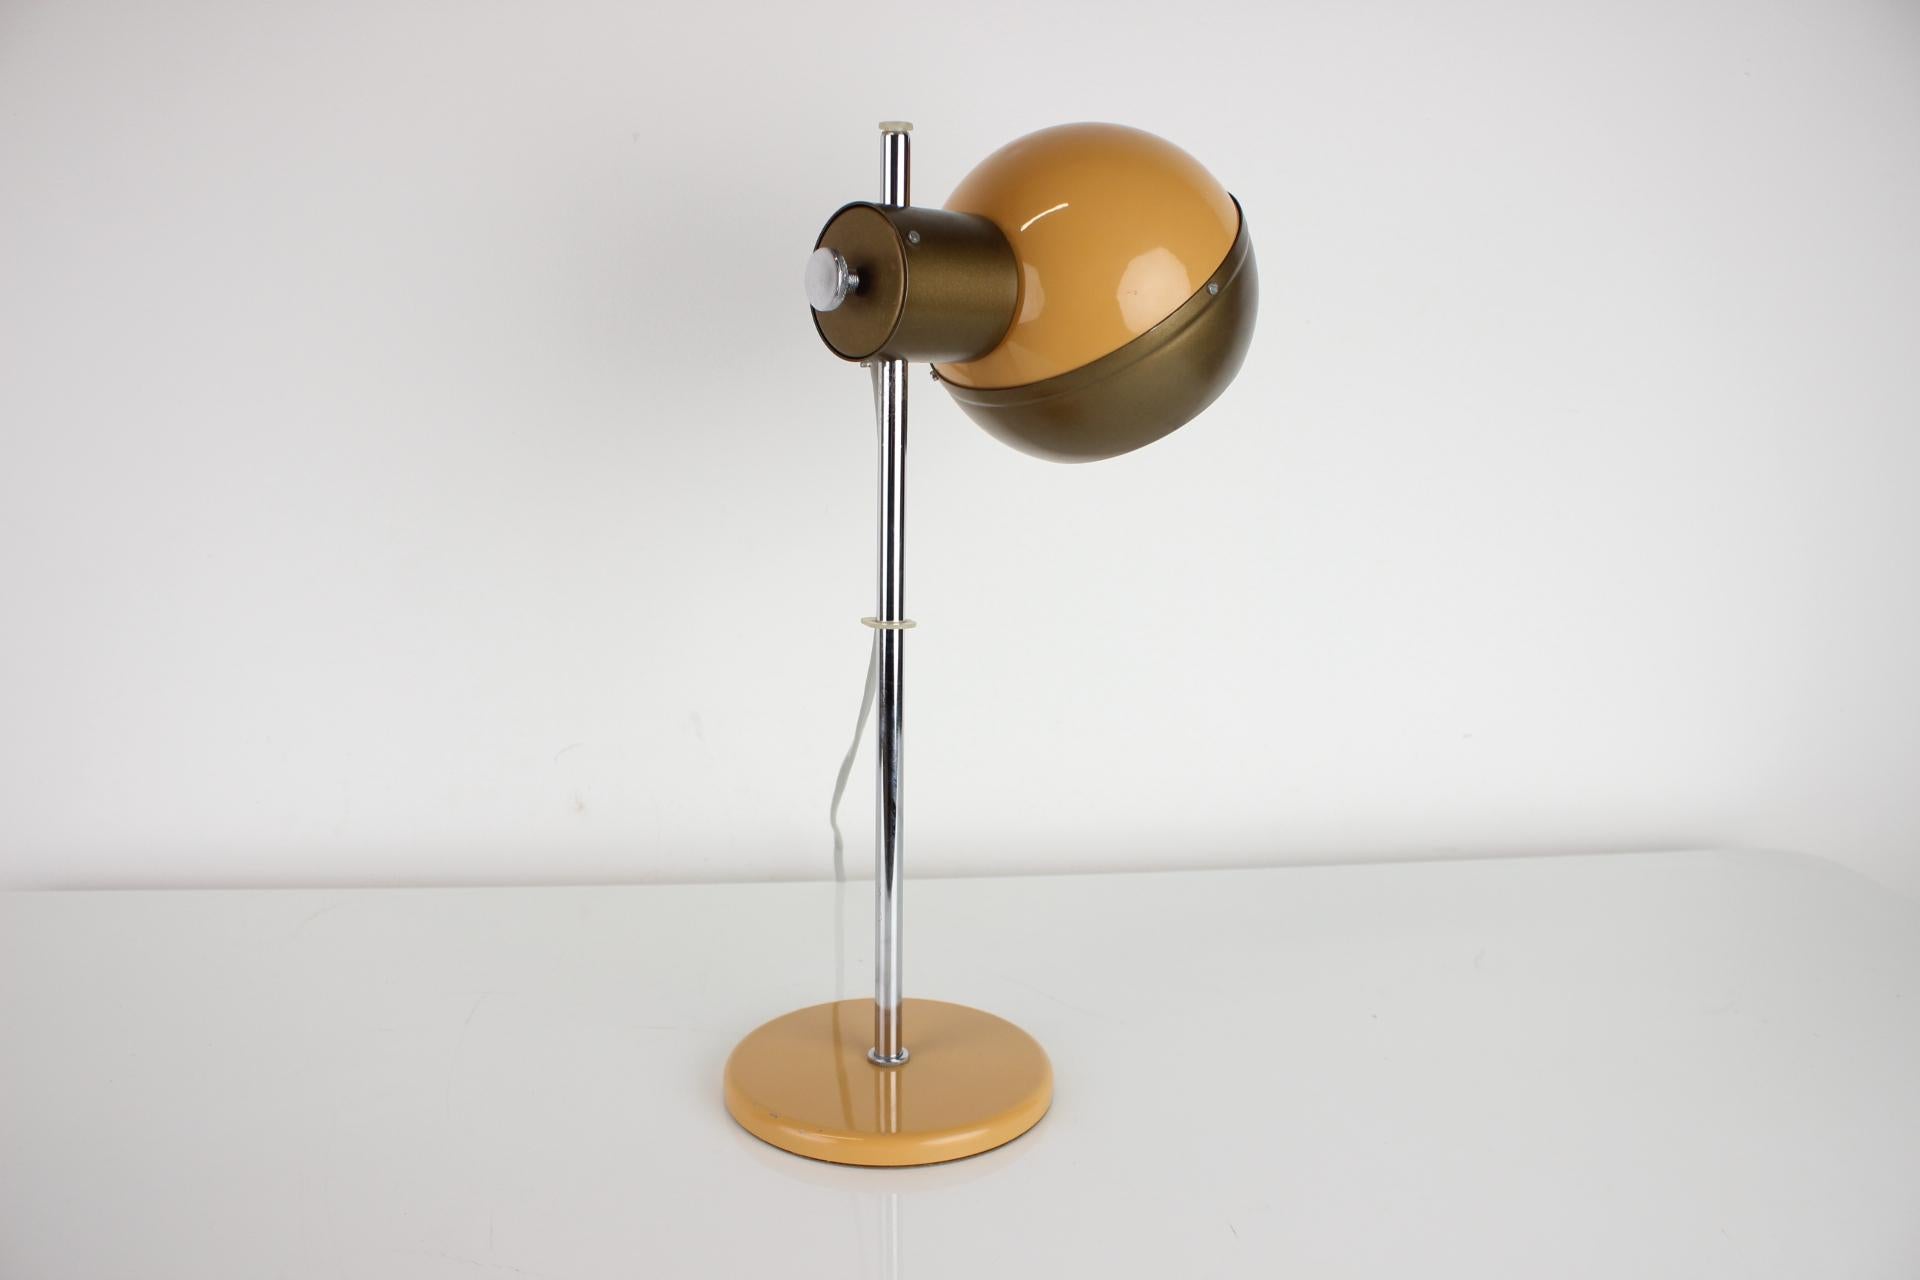 Made in Czechoslovakia.
Made of lacquered metal, chrome.
Adjustable shade.
1x60W,E27 or E26 bulb.
US adapter included.
Original condition.